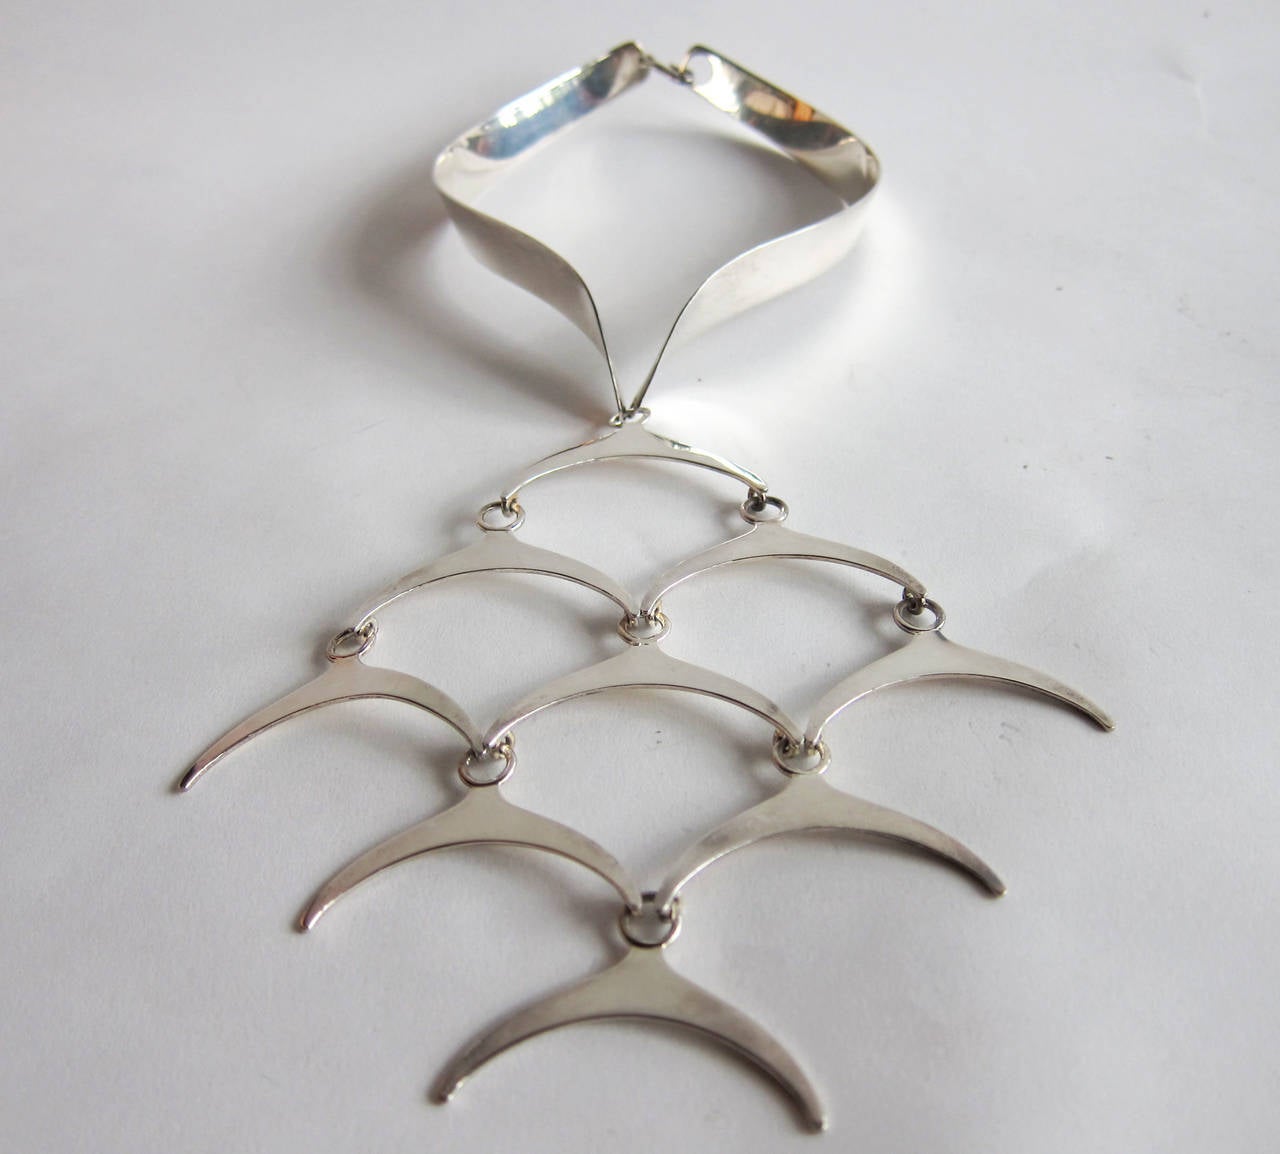 Sterling silver jointed large scale necklace created by Jose Puig Doria of Barcelona, Spain.  Necklace choker measures 15